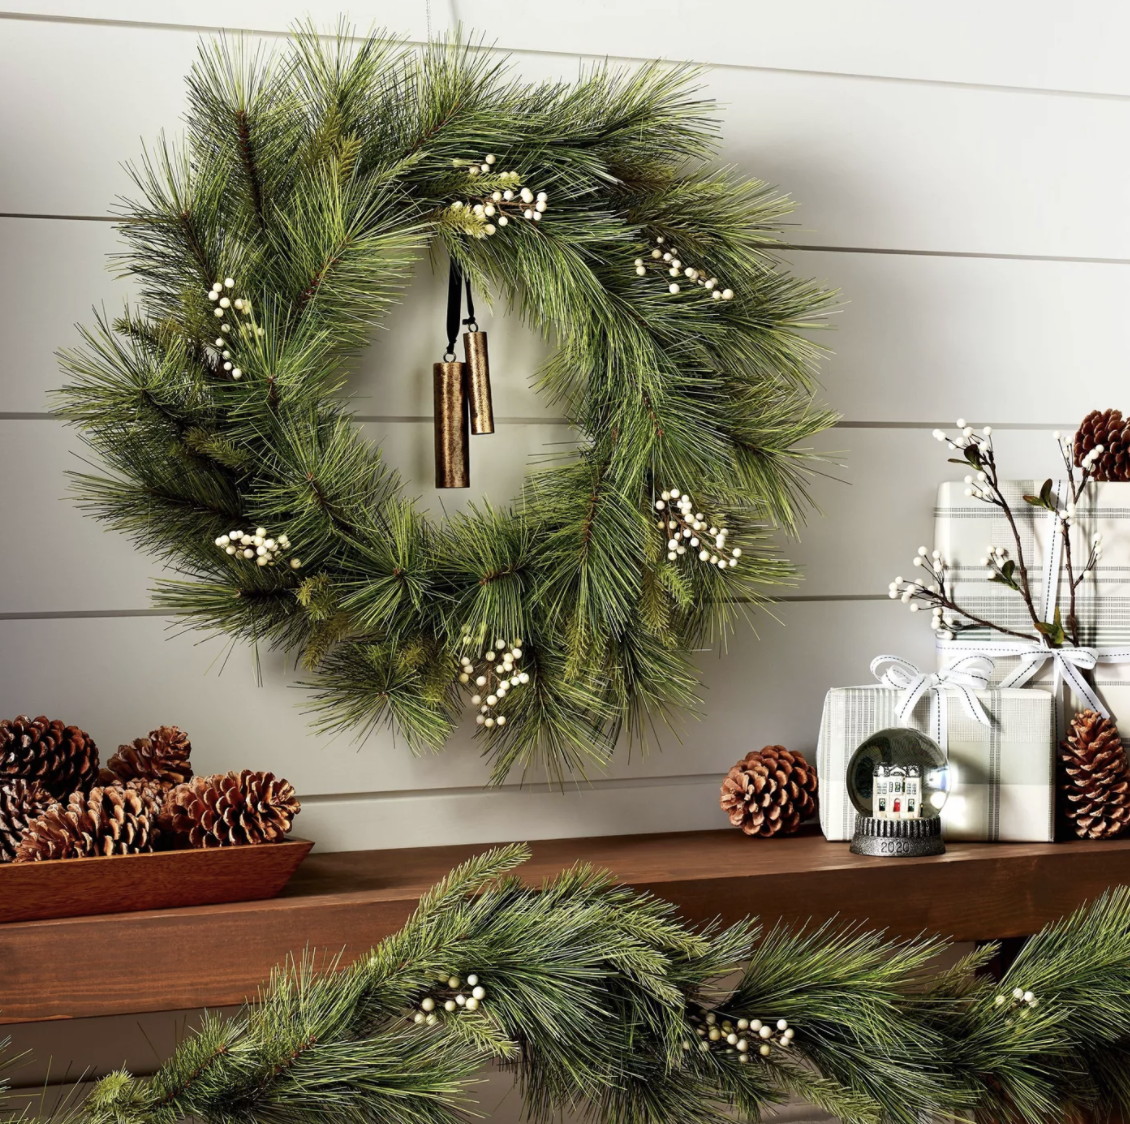 Details about   US Christmas Wreath Fireplace Artificial Pine Garland Home Ornaments Xmas Decor 